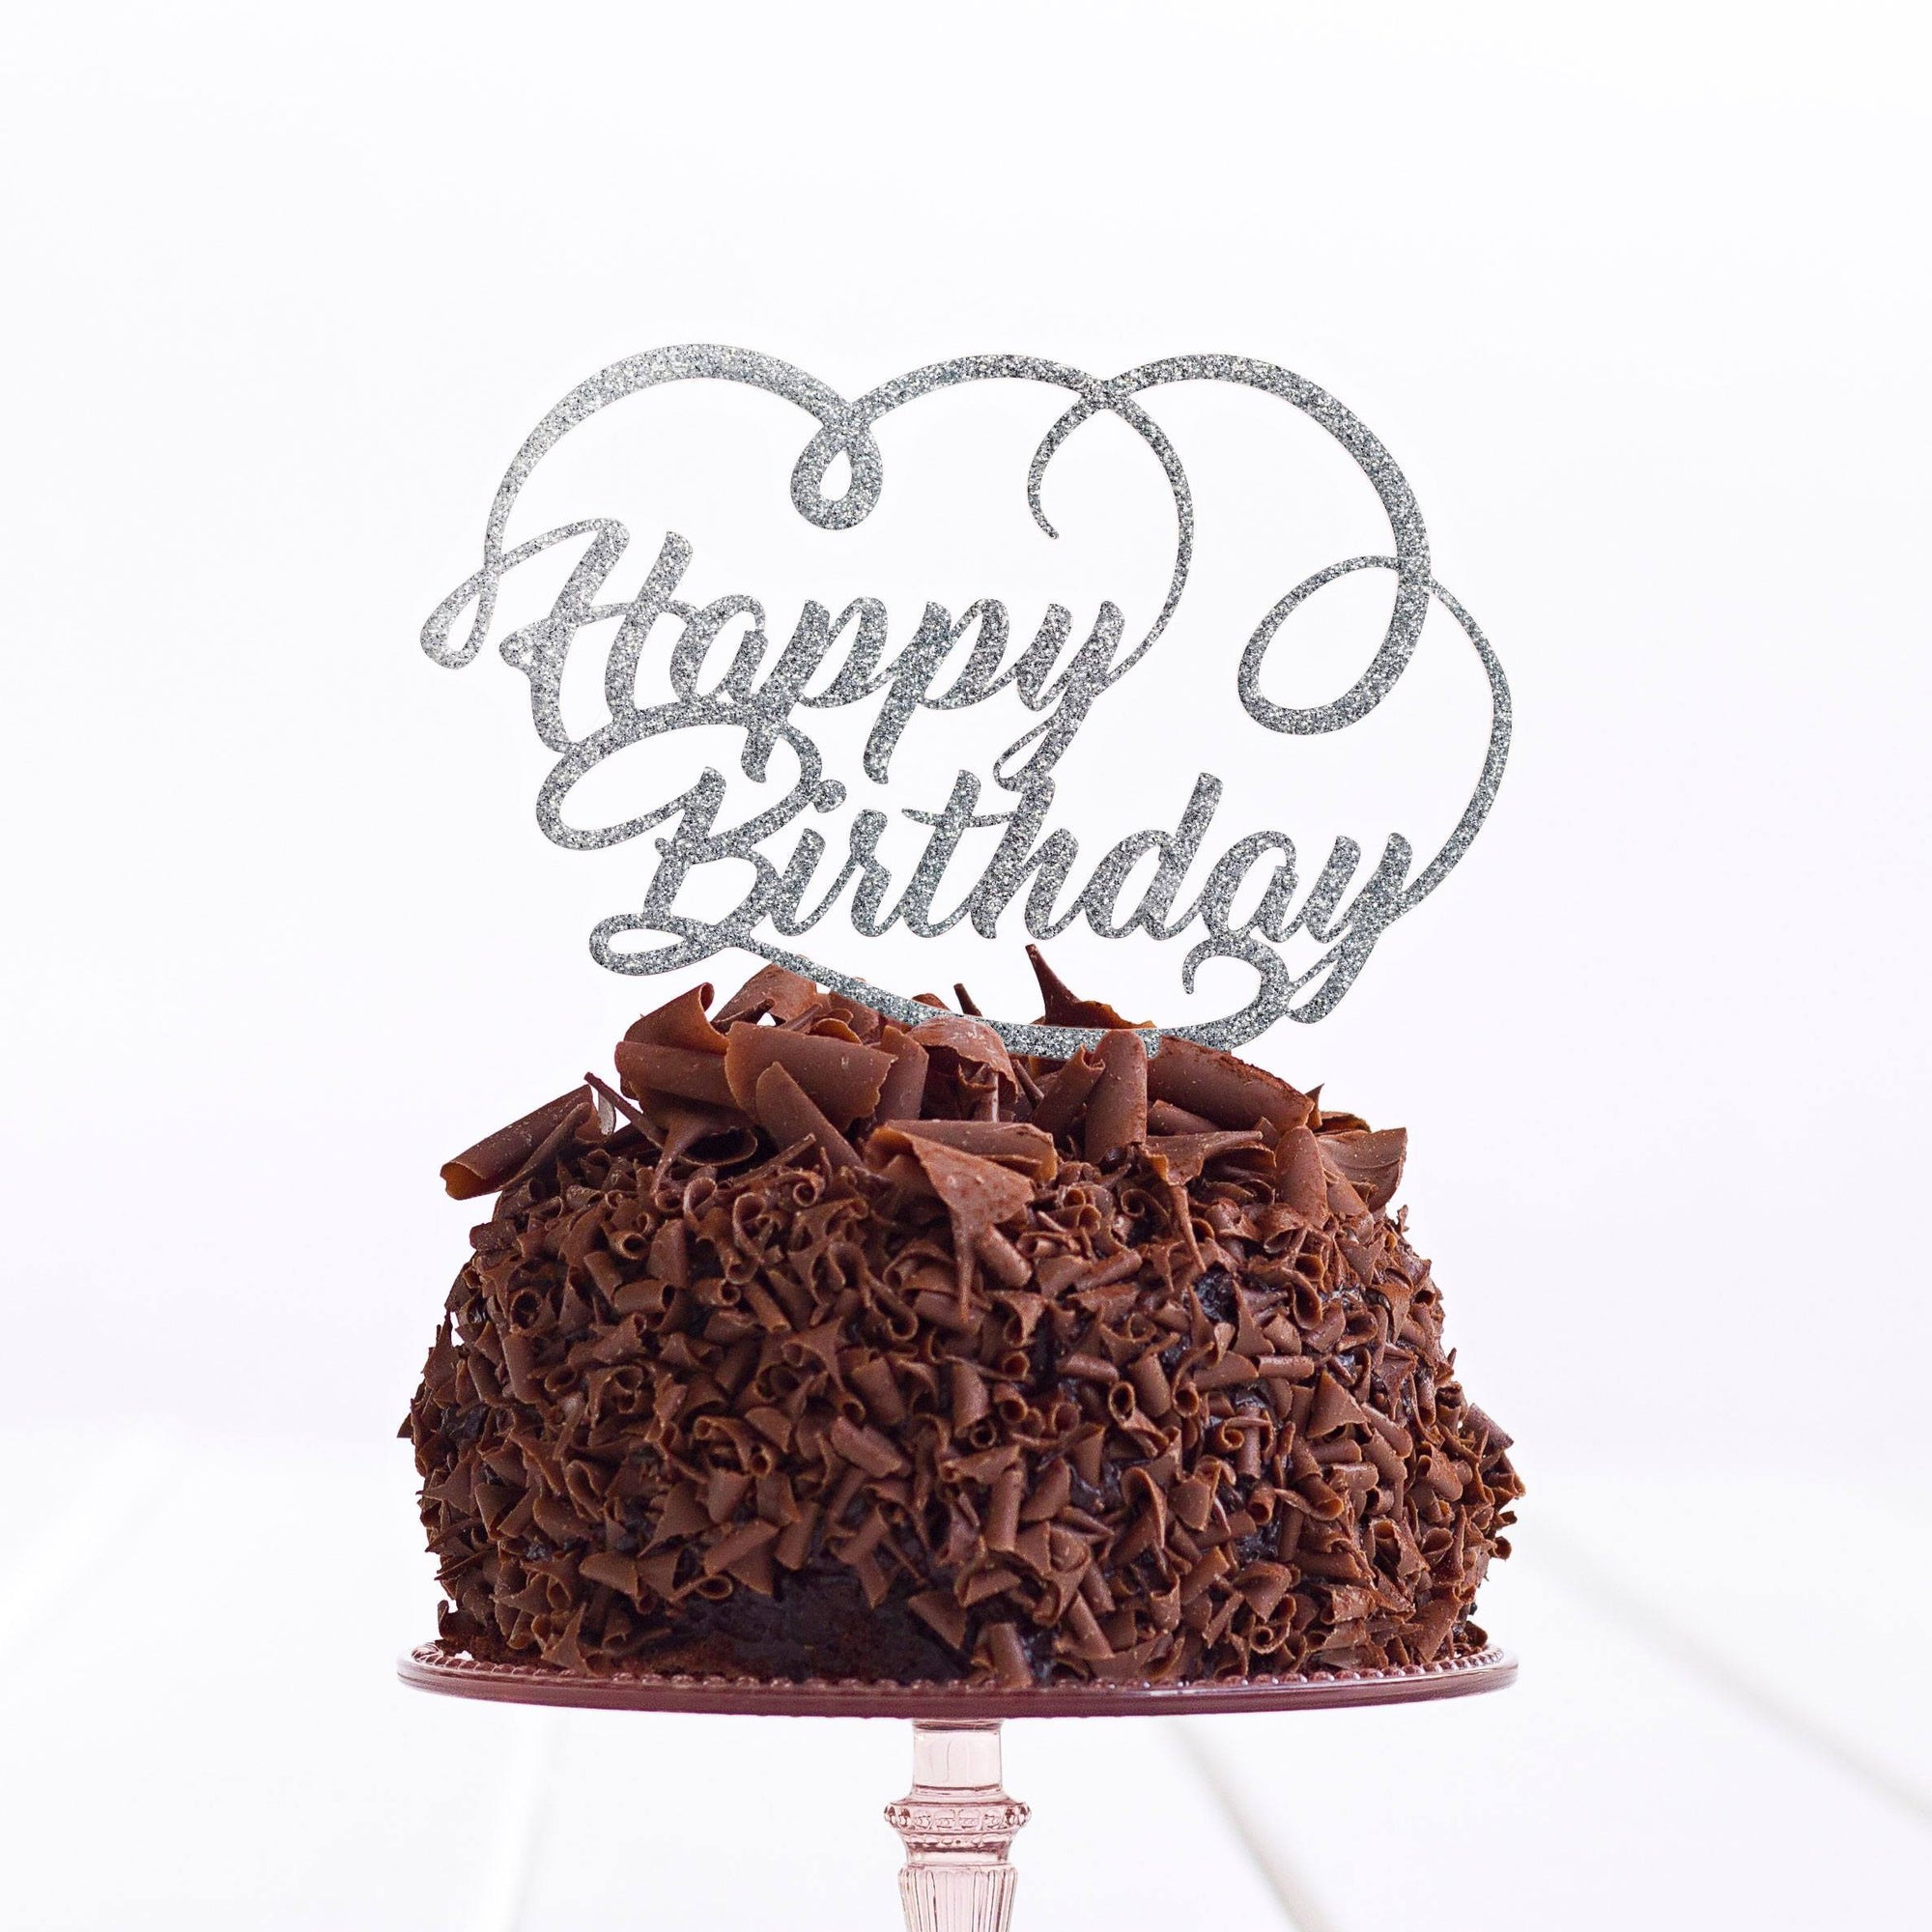 Round CHOCOLATE TRUFFLE CAKE, Packaging Size: 12 cm, Weight: 0.5 kg